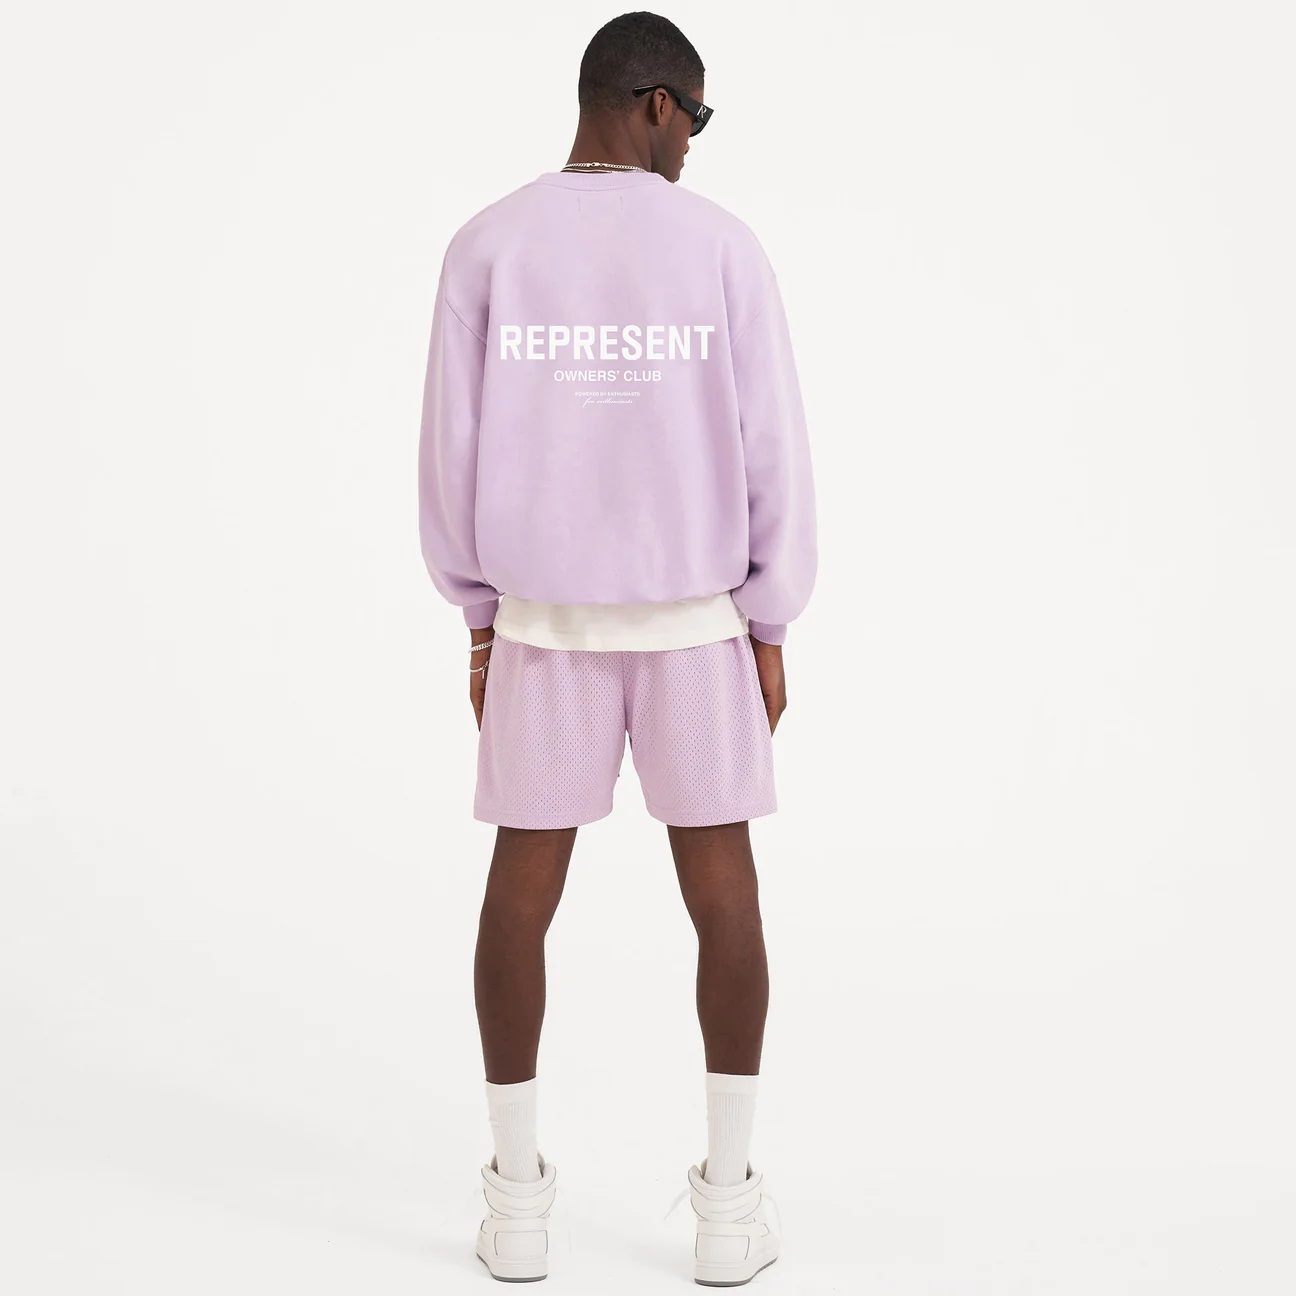 REPRESENT Owners Club Sweater in Pastel Lilac XXL